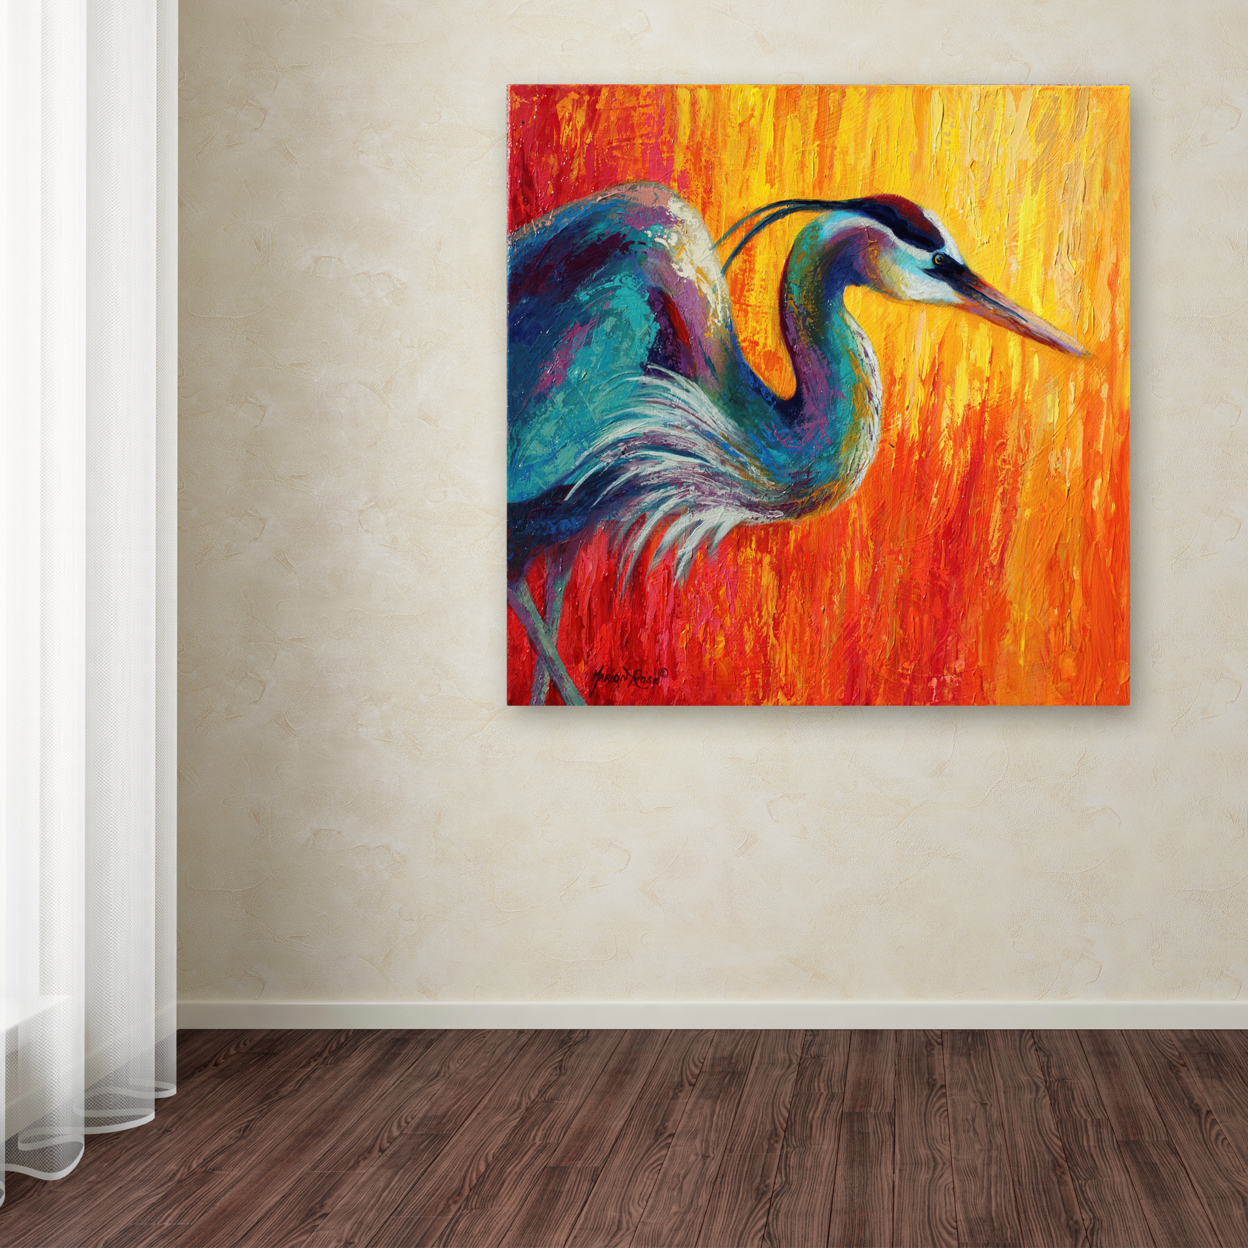 Marion Rose 'Blue Heron 1' Ready To Hang Canvas Art 24 X 24 Inches Made In USA